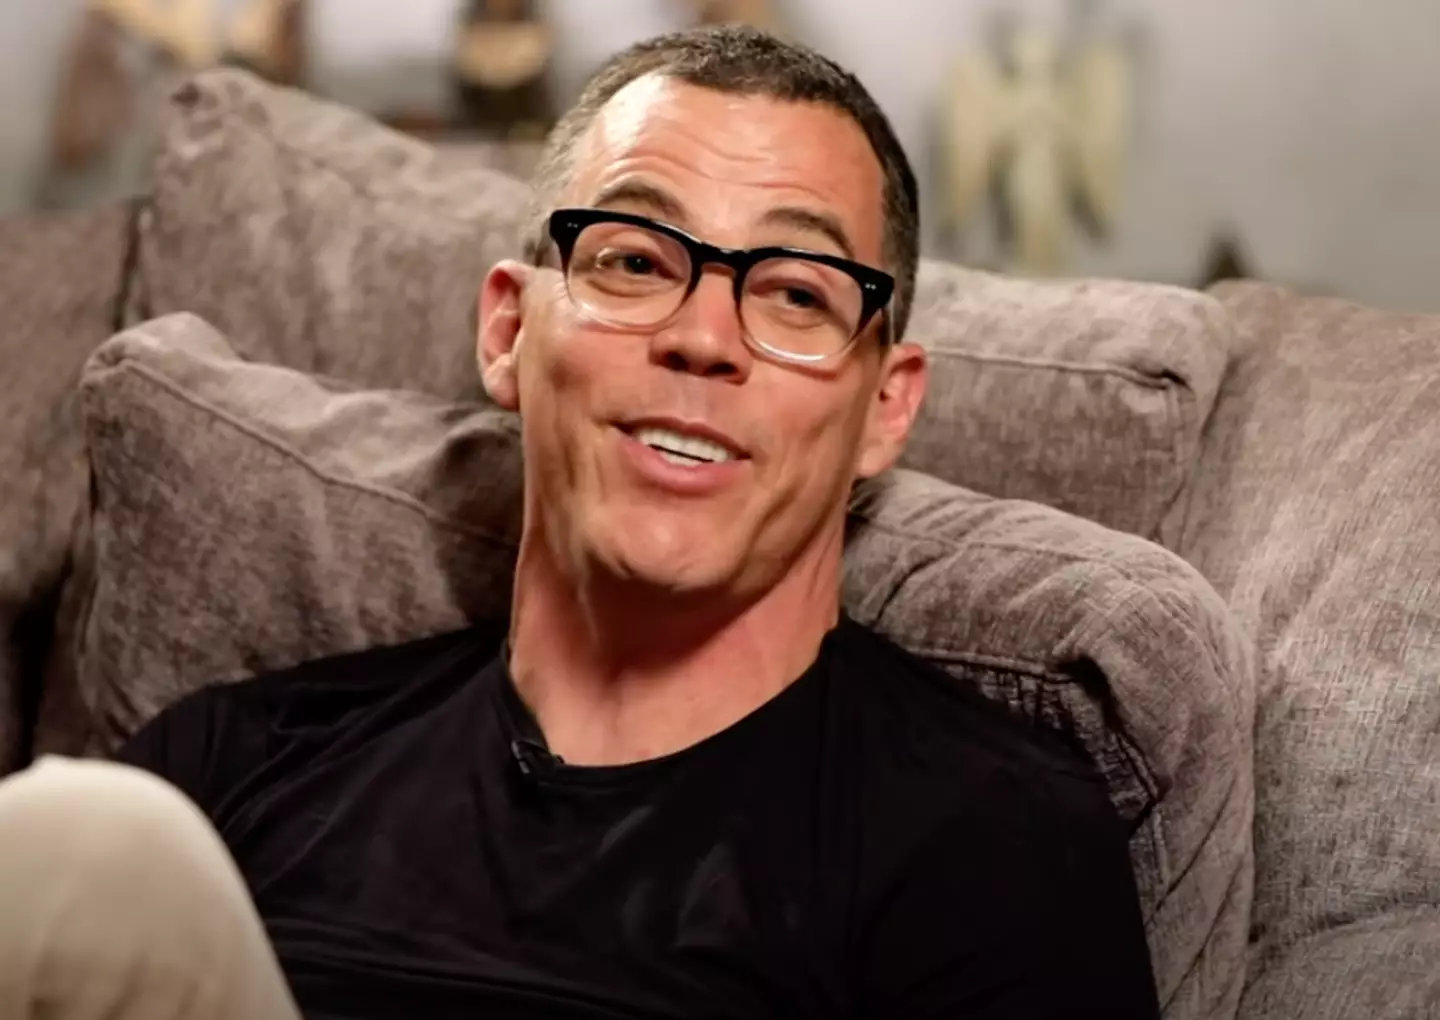 Steve-O isn’t one to hold back when it comes to discussing his past addiction battles.